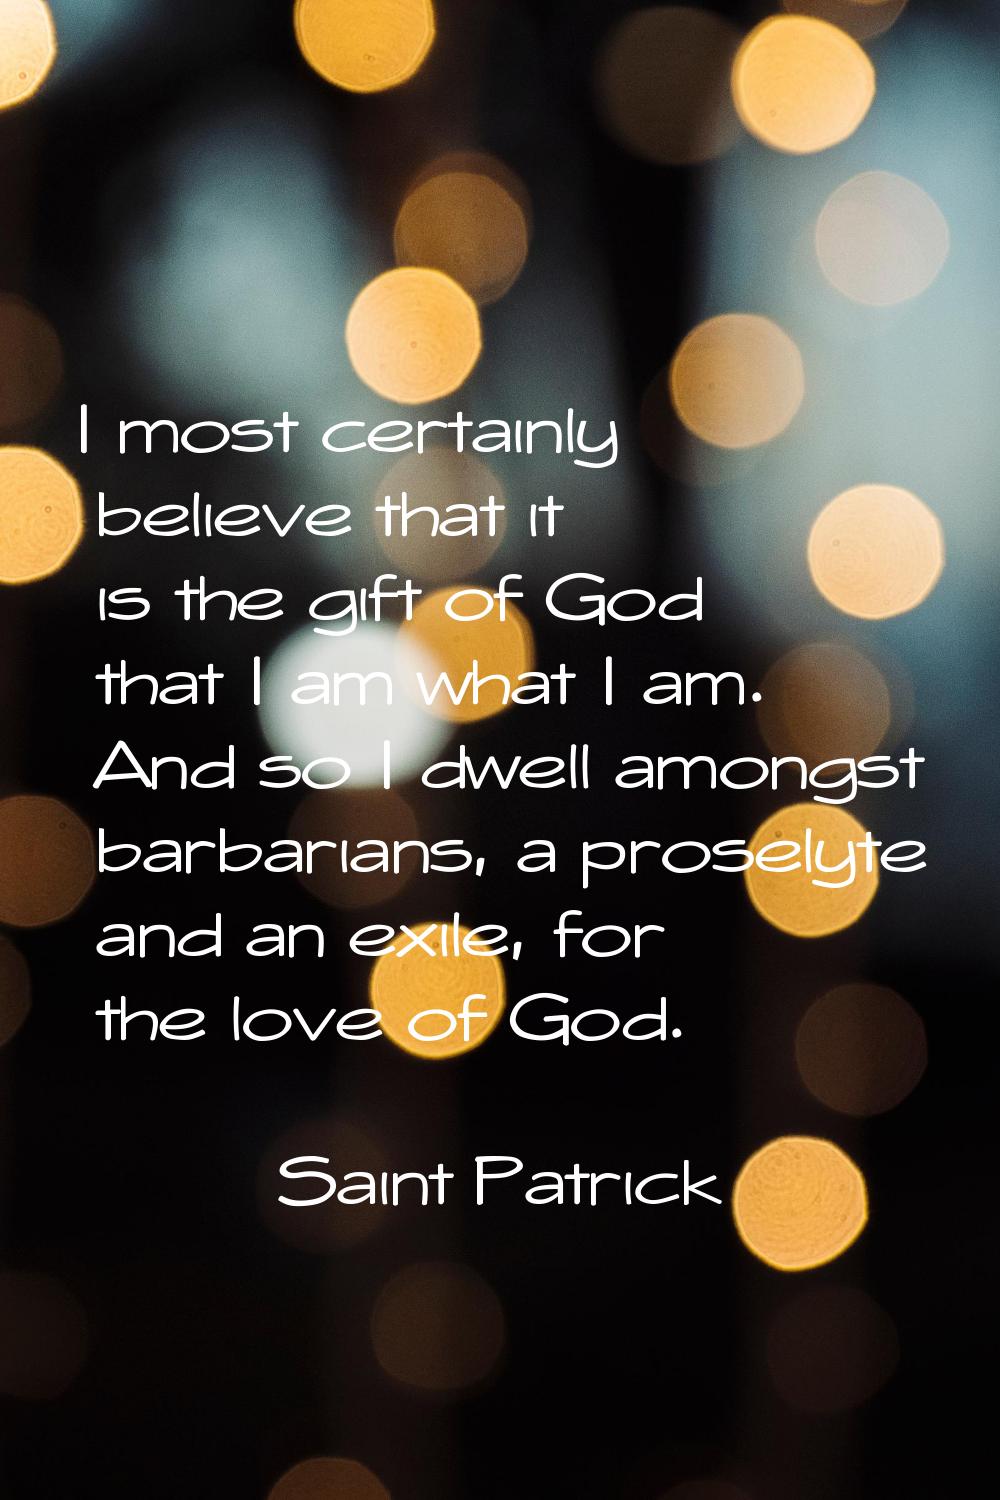 I most certainly believe that it is the gift of God that I am what I am. And so I dwell amongst bar